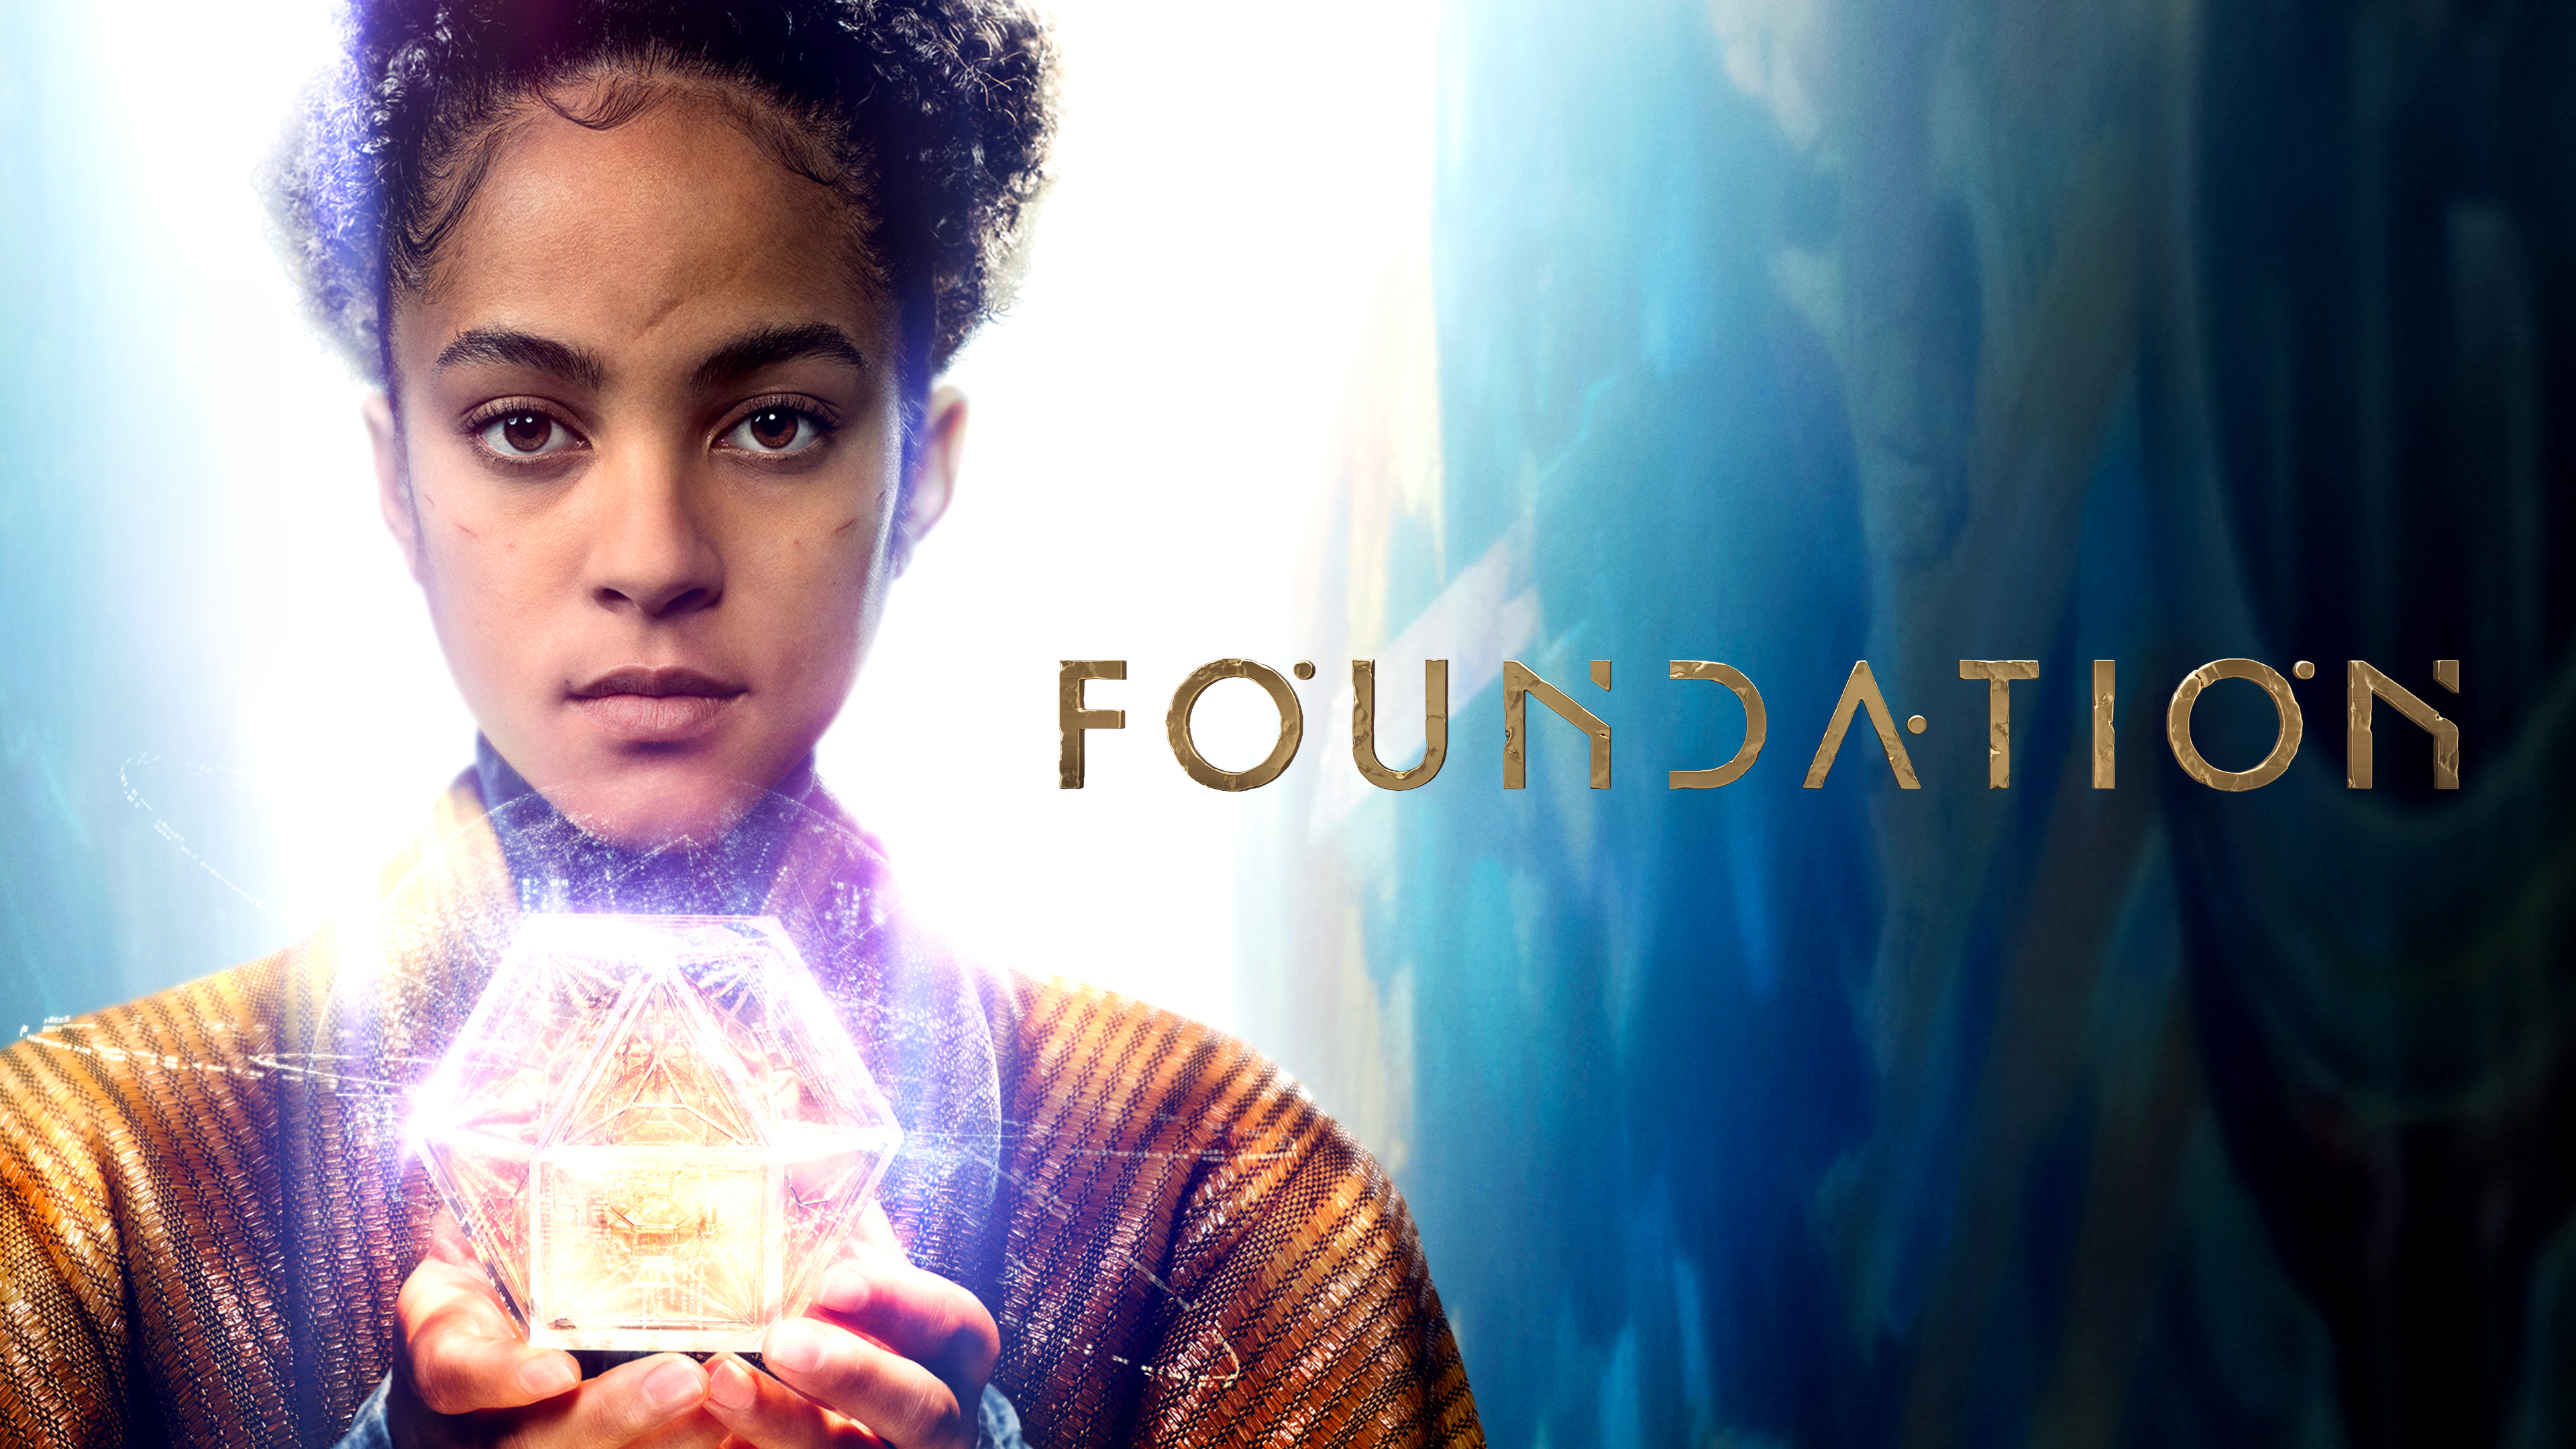 Foundation (TV Series): A band of exiles on their monumental journey to save humanity. 3840x2160 4K Wallpaper.